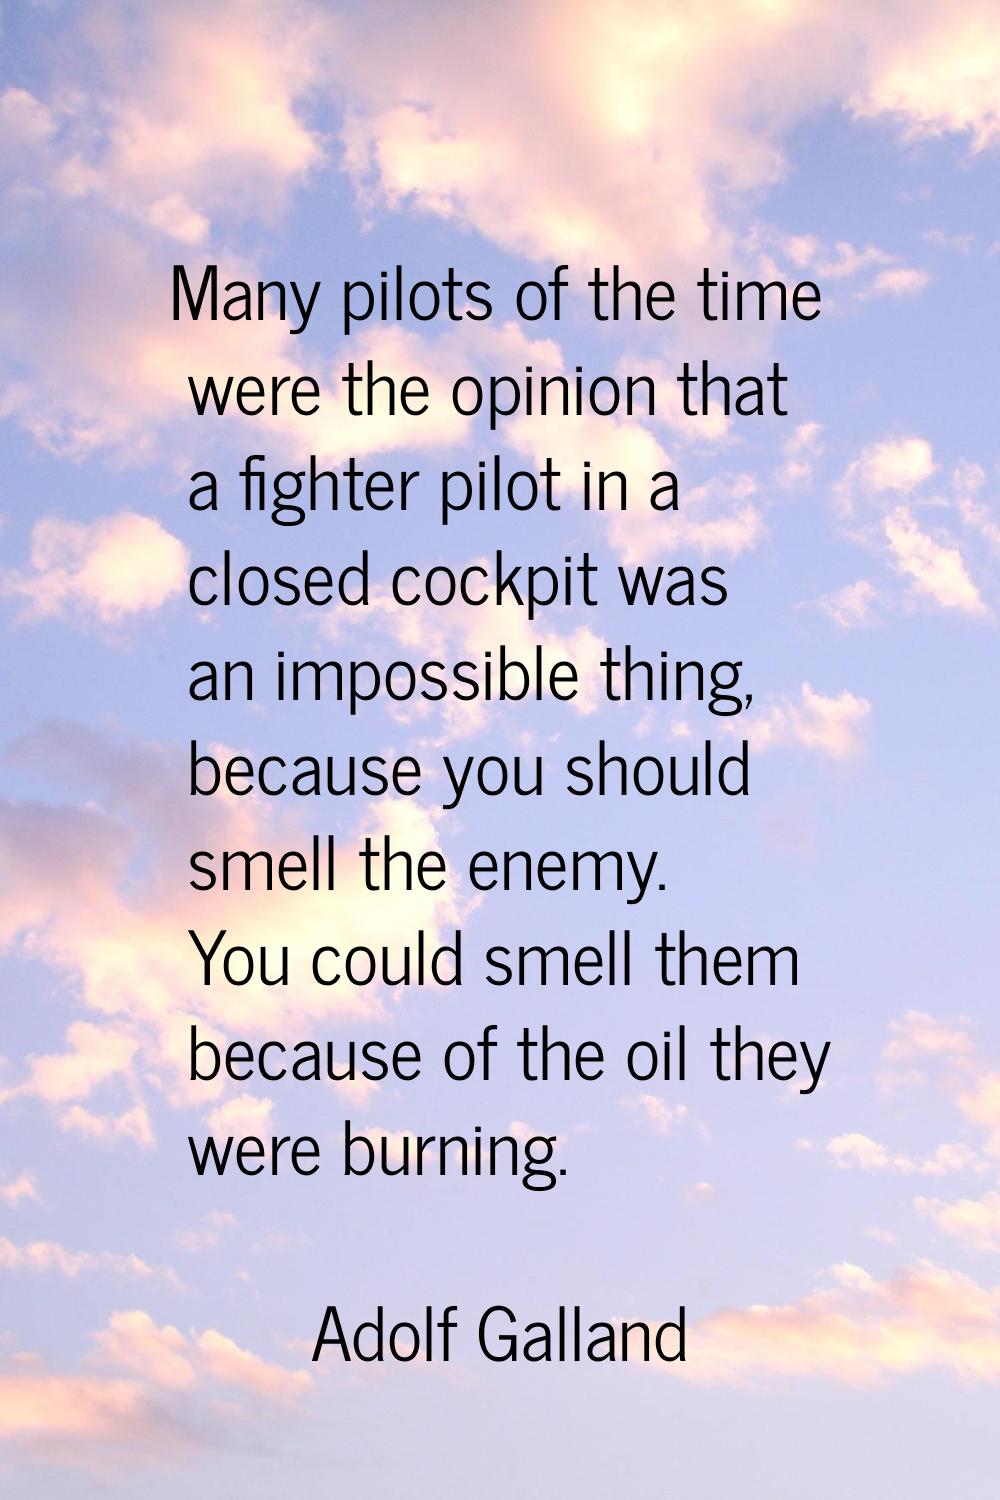 Many pilots of the time were the opinion that a fighter pilot in a closed cockpit was an impossible